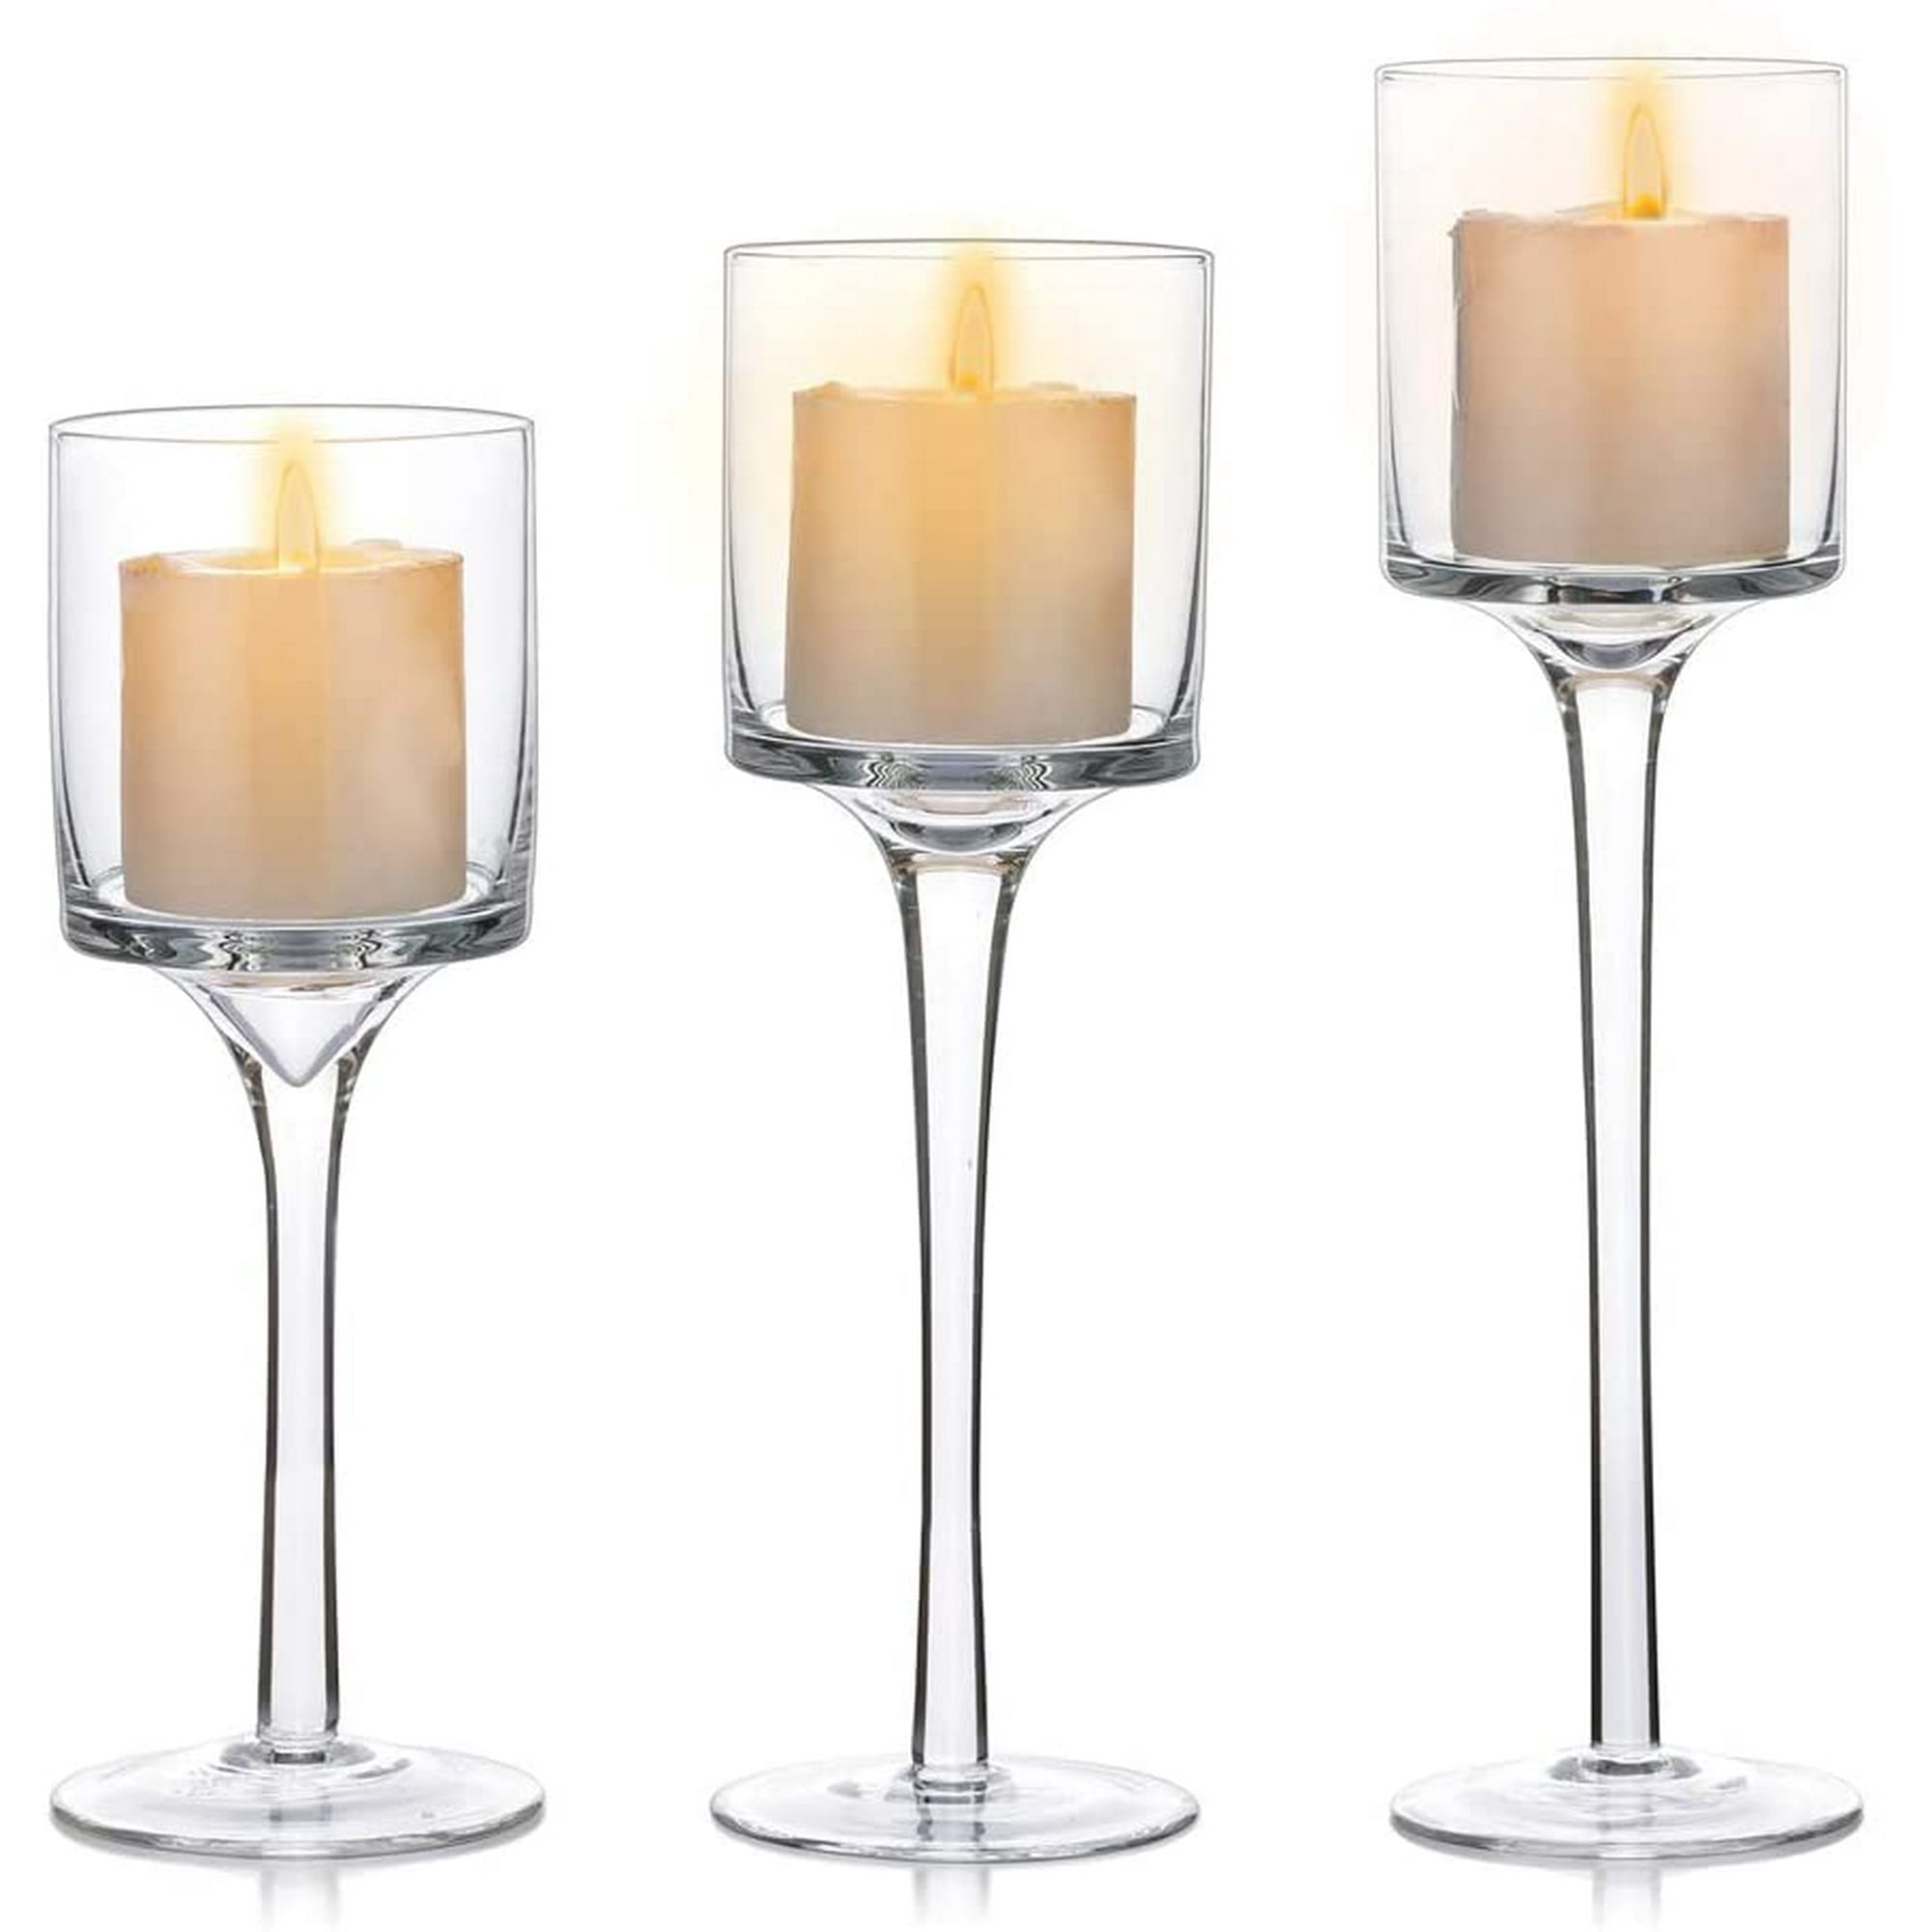 Glass Candleholders Tea Light Candle Holders Clear Wedding Weddings  Hurricane Tall Elegant Ideal for Dining Party Home Decor Parties Table  Settings